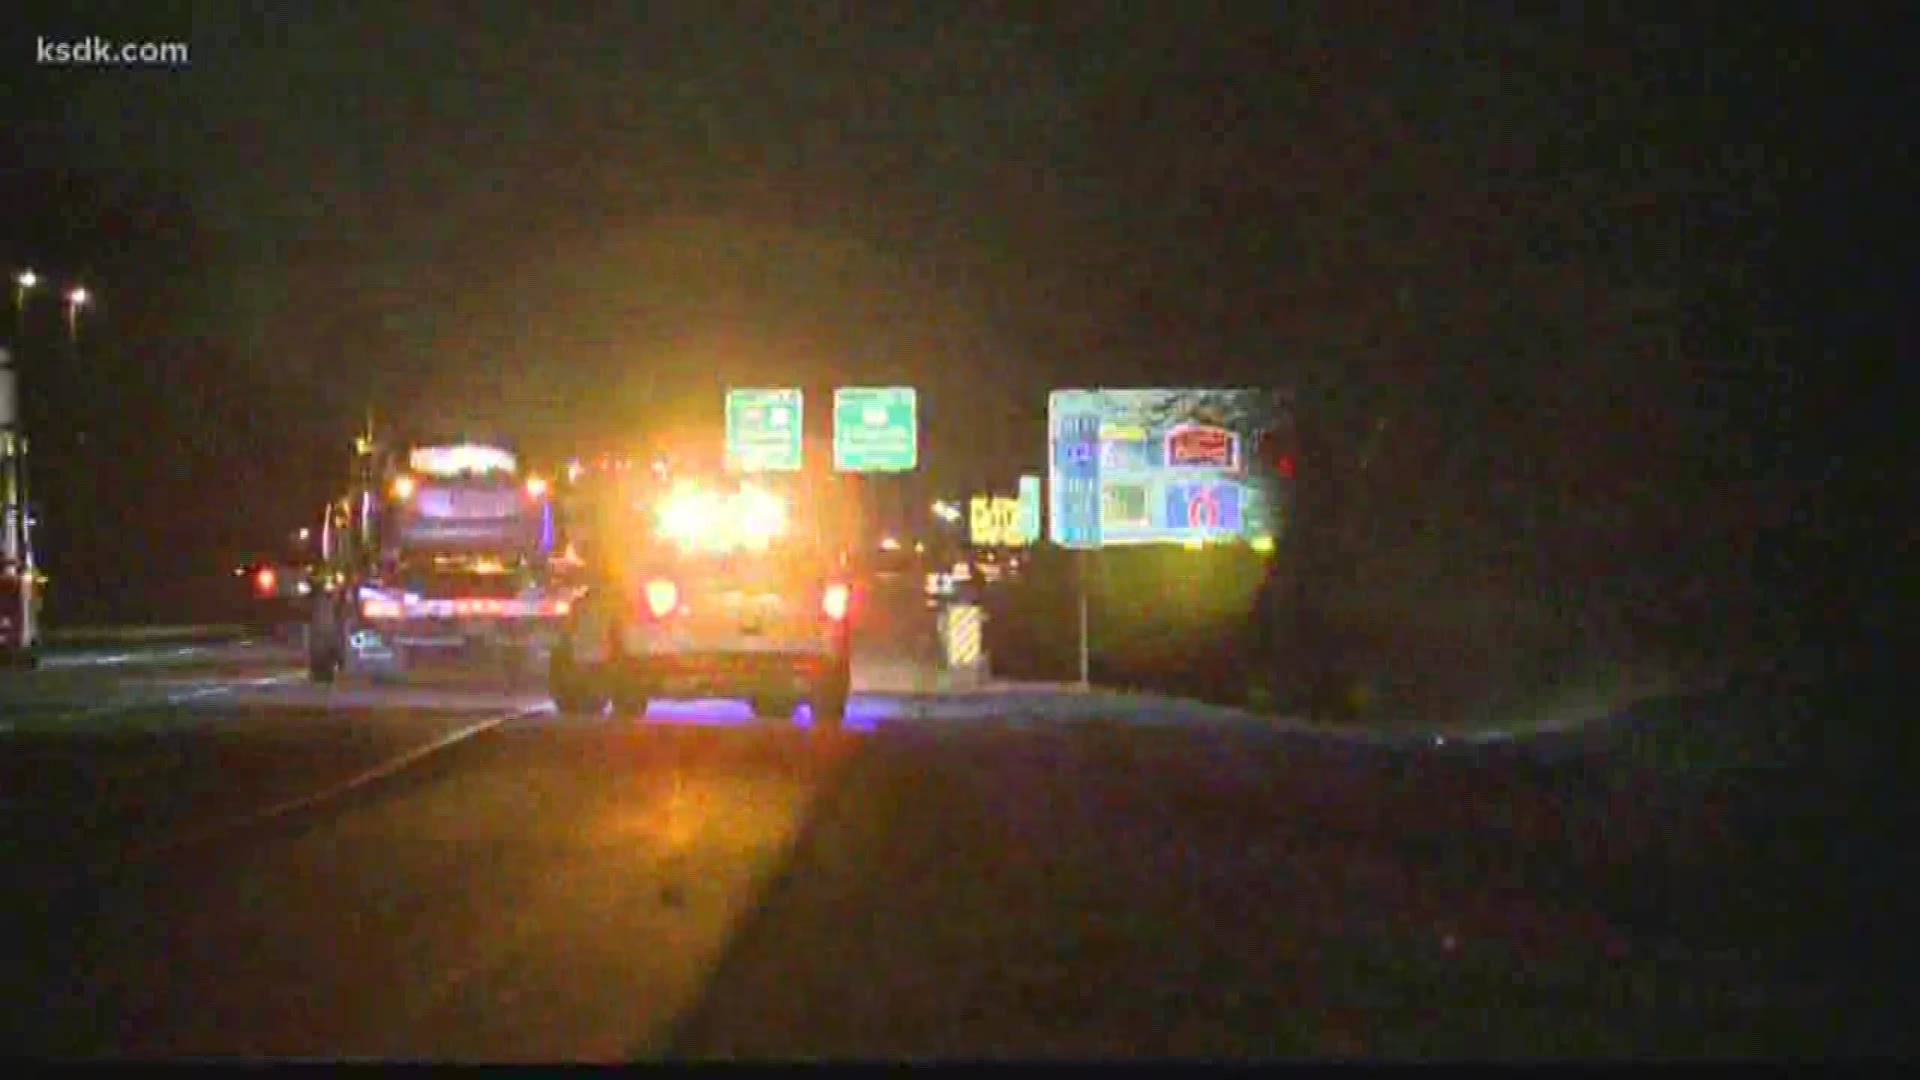 Man dies after being hit by car on I-64